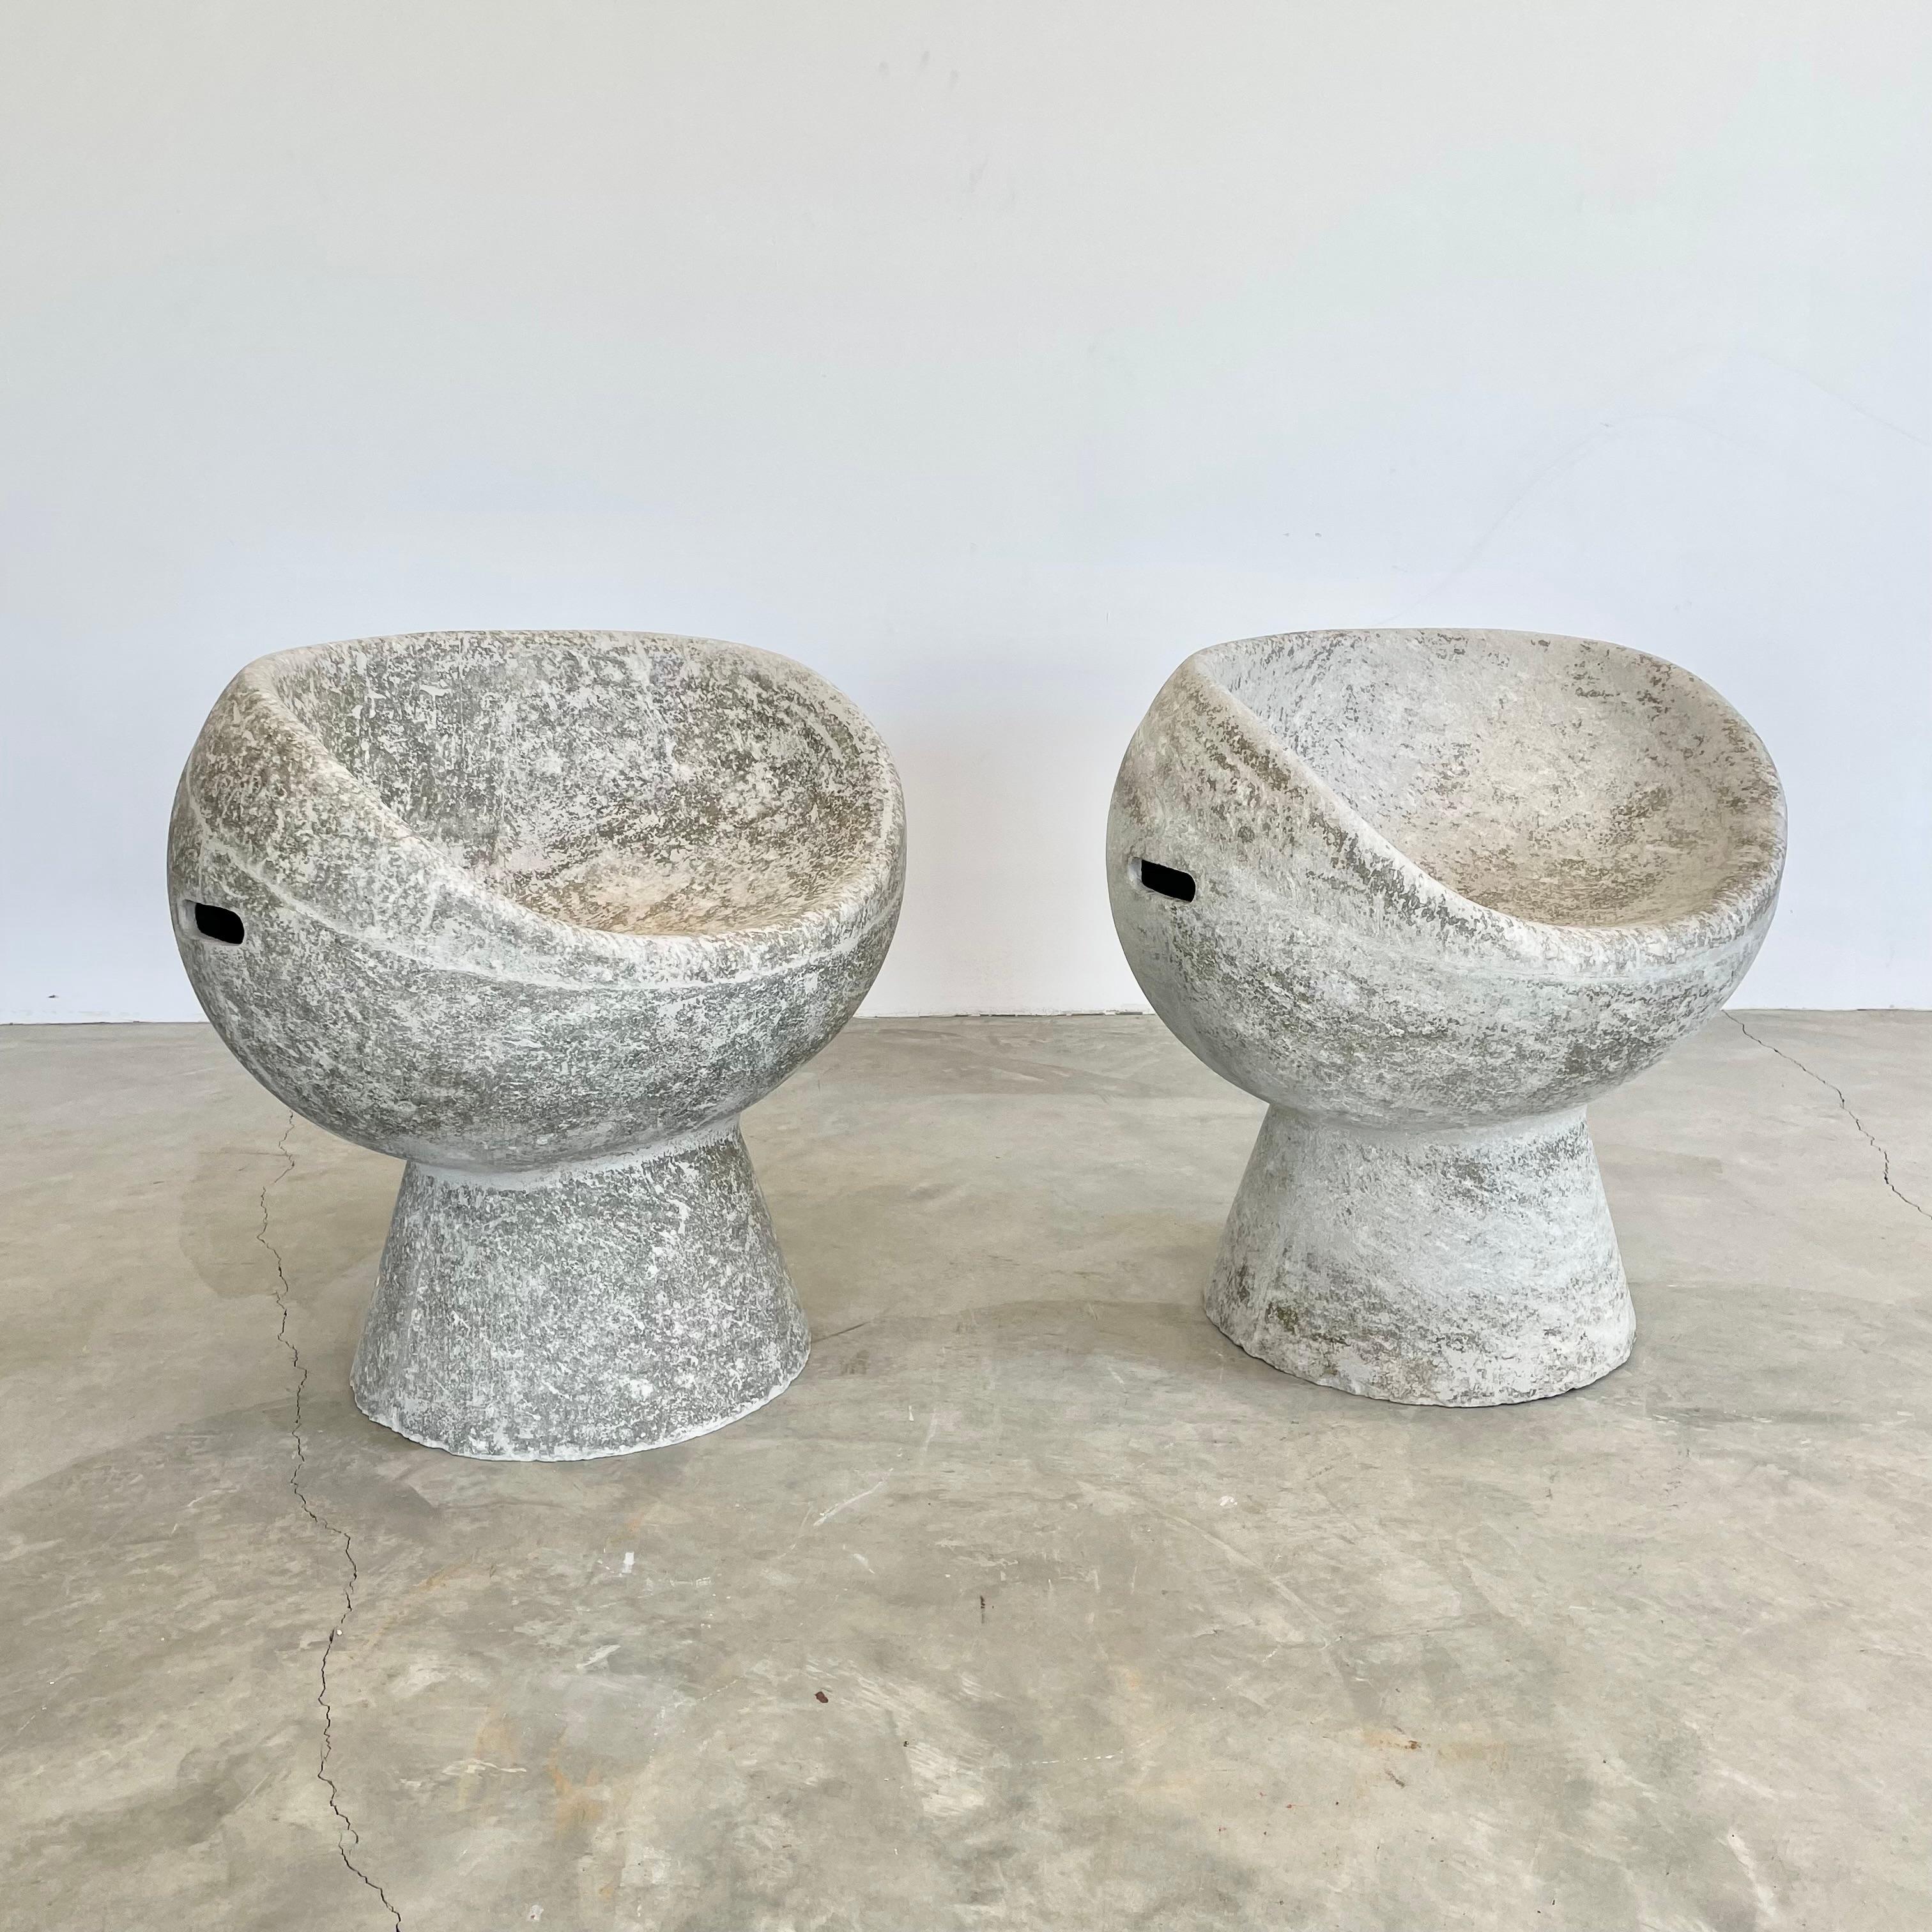 Stunning pair of concrete pod chairs designed by Swiss Architect Willy Guhl. Hand made in Switzerland by Eternit in the 1960s. Gorgeous patina. Factory drilled hole in seat for water to drain. Great sculptural pieces. Perfect for indoors or outside.